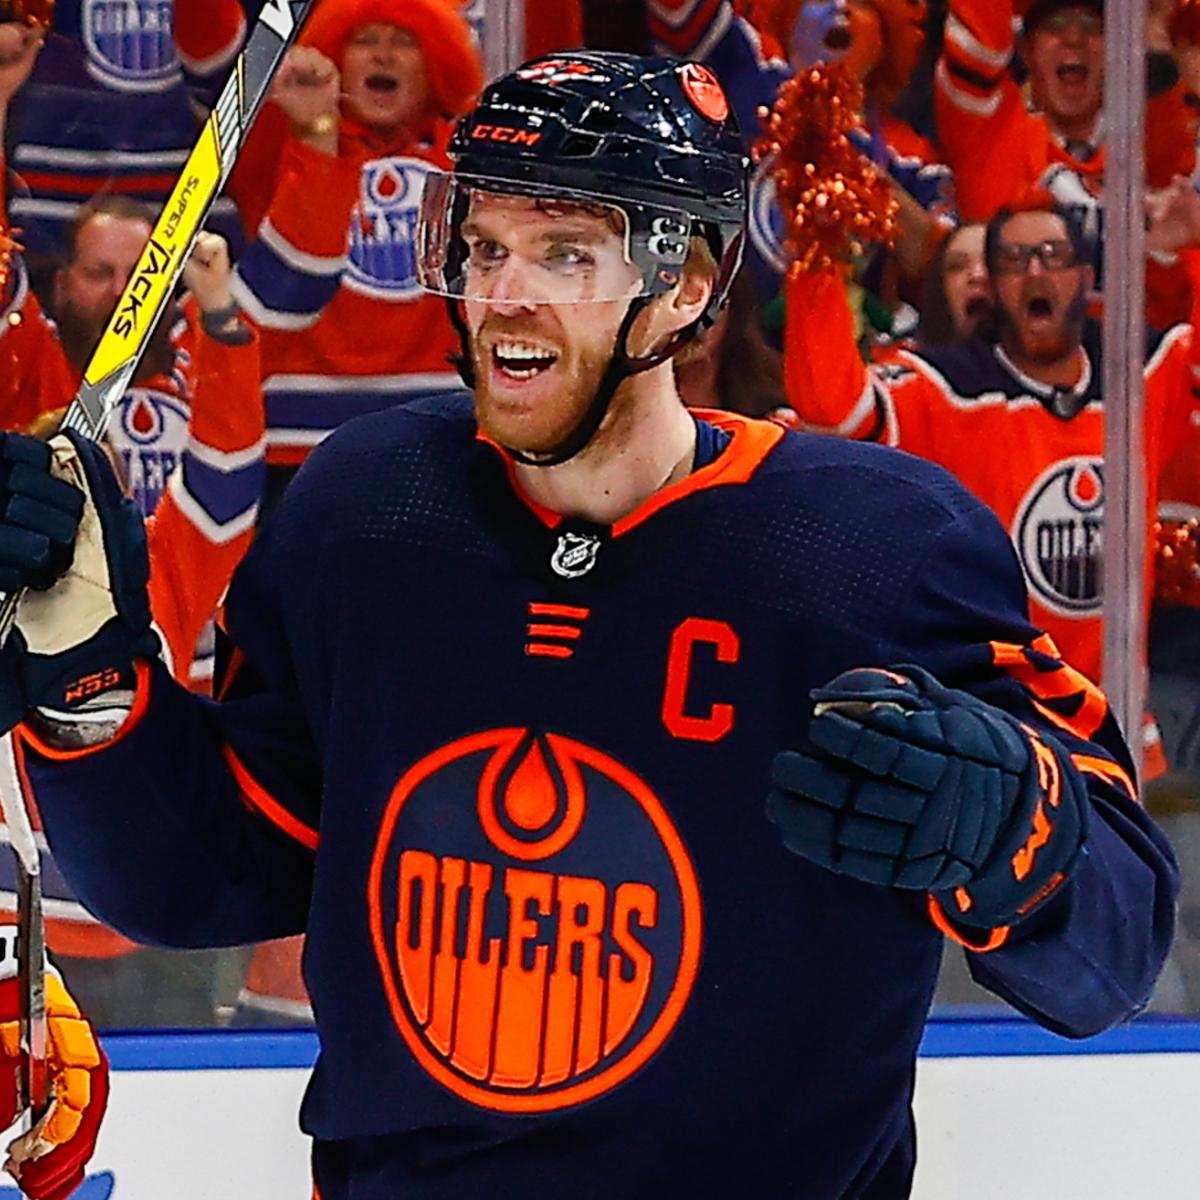 Connor McDavid Takes a Big Leap in March Toward Greatness with Oilers’ WCF Berth